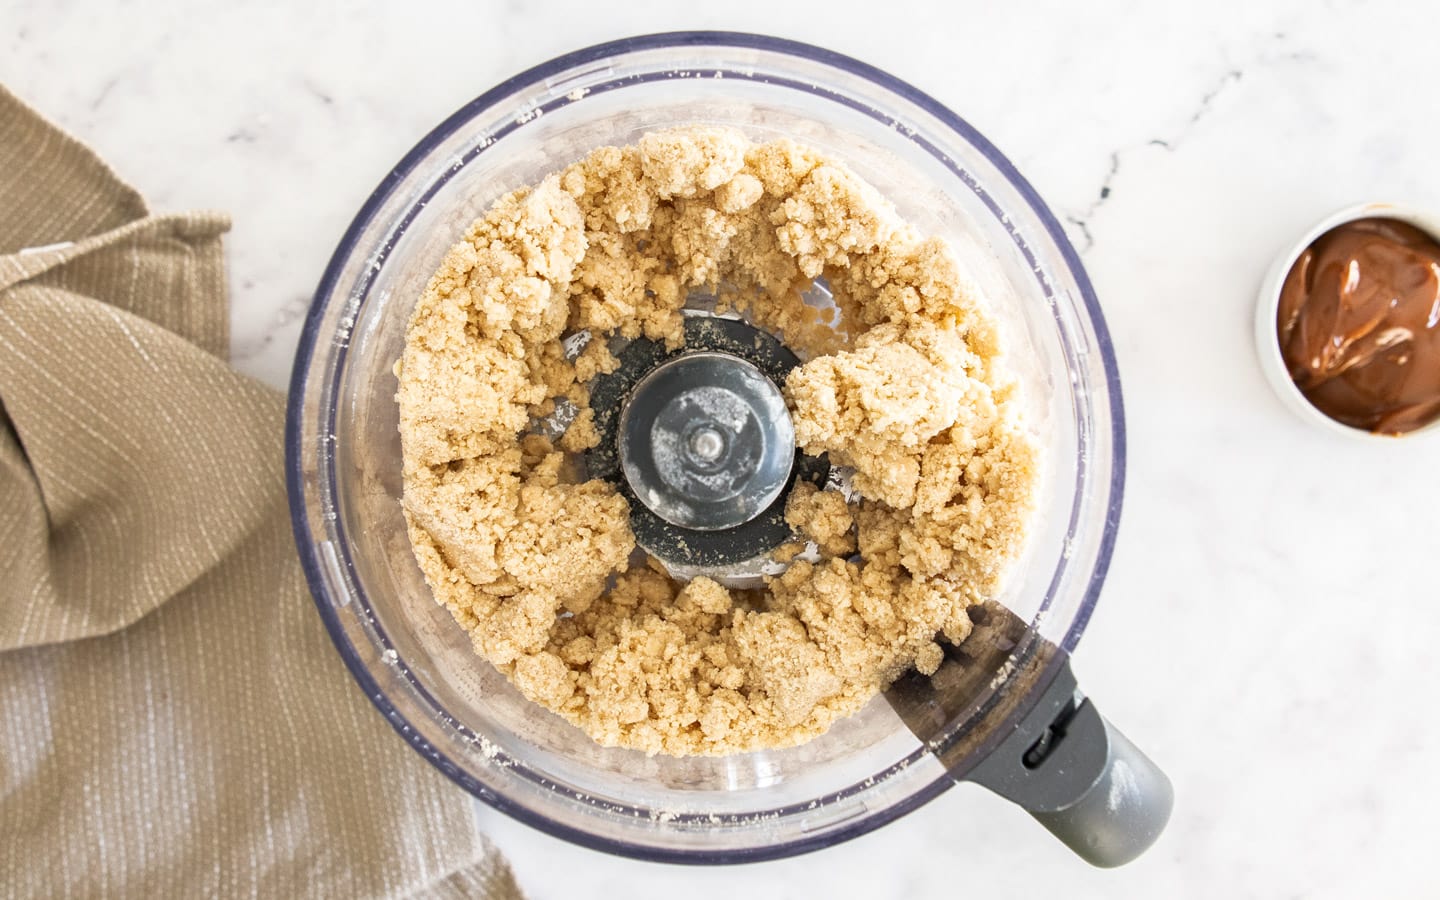 The clumping pastry in the food processor.